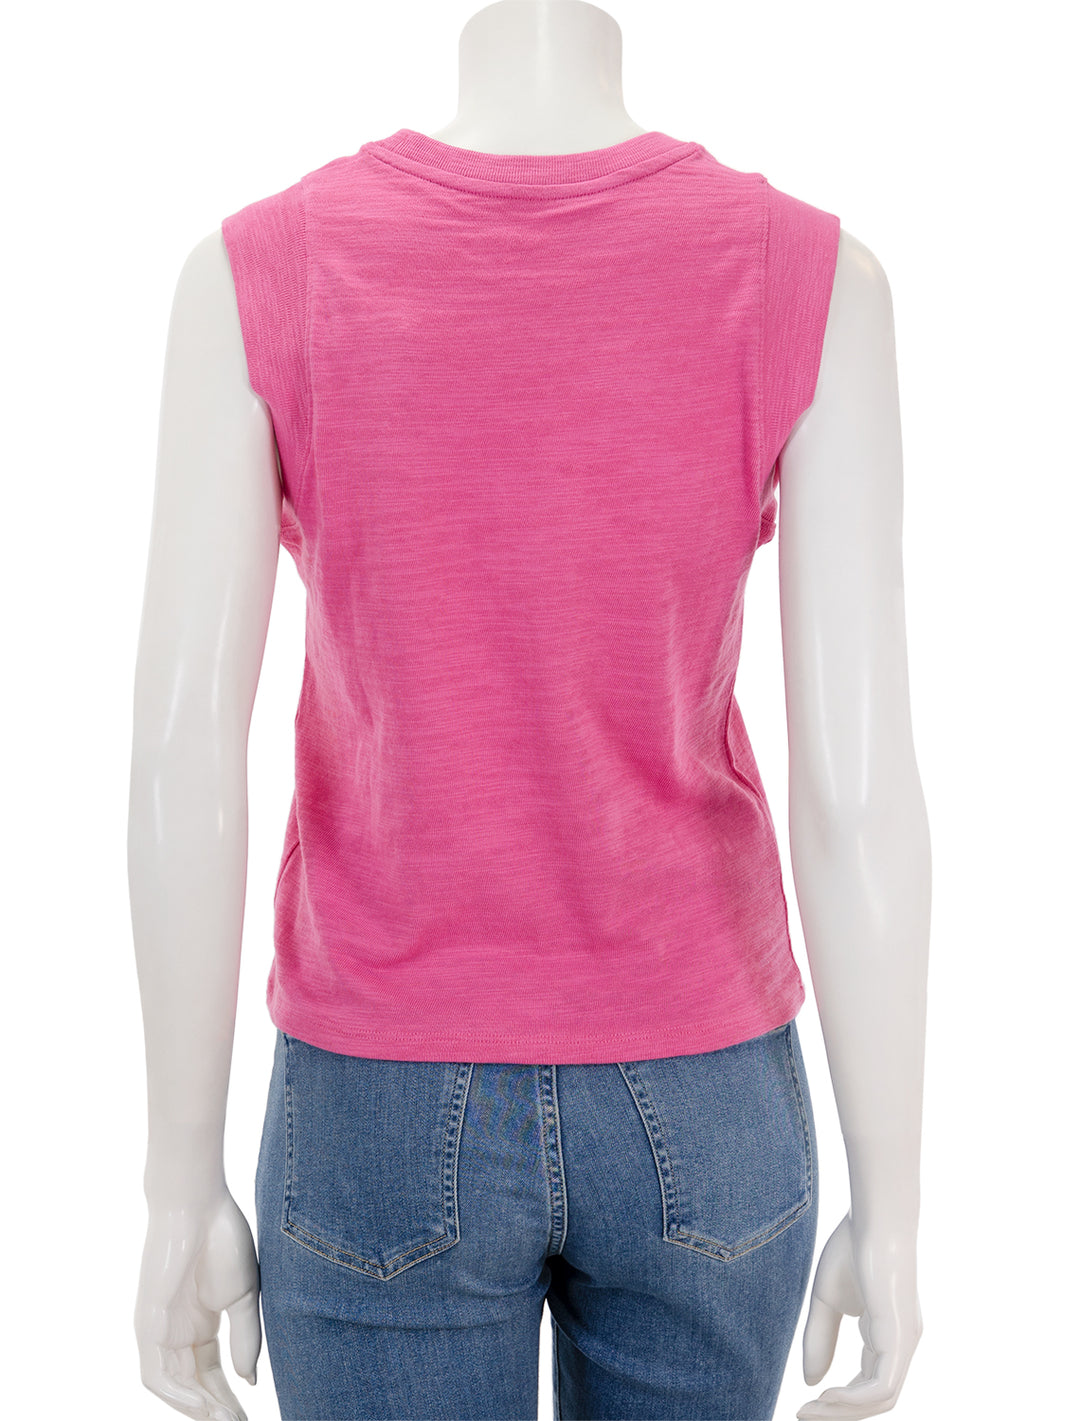 Back view of Faherty's sunwashed slub muscle tank in cone flower pink.